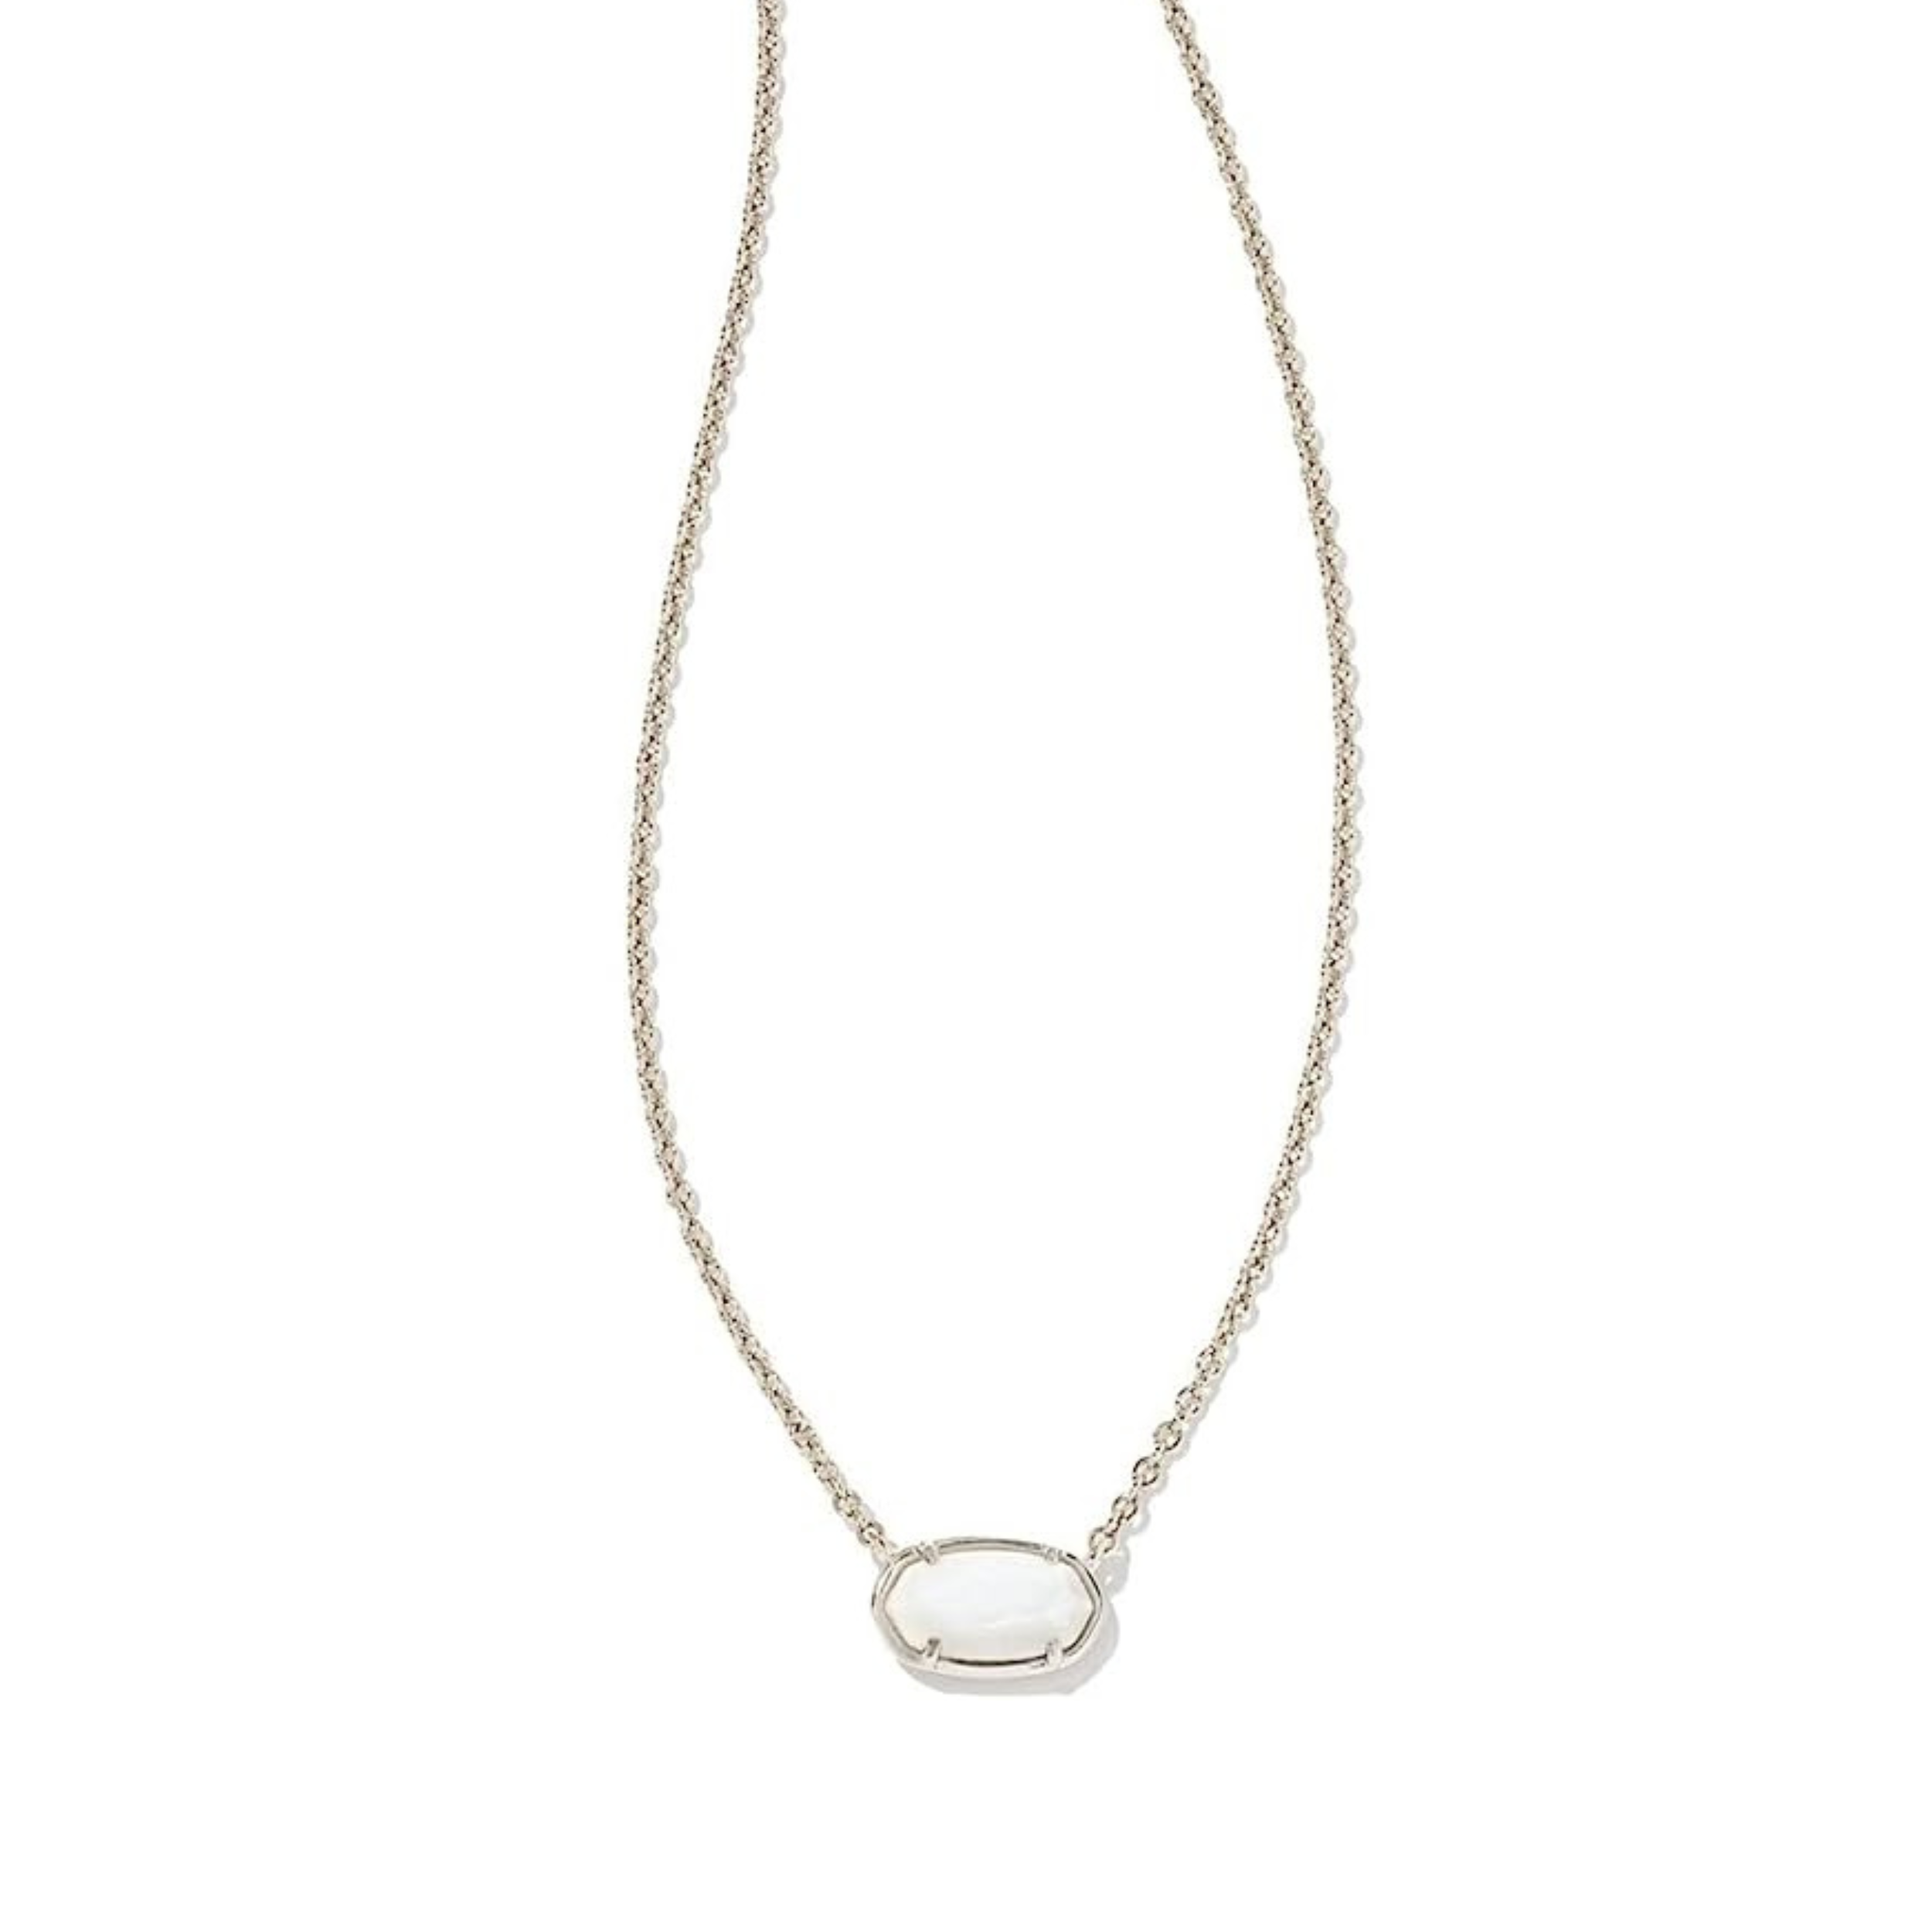 Silver chain necklace with white mother of ivory pendant, pictured on a white background.